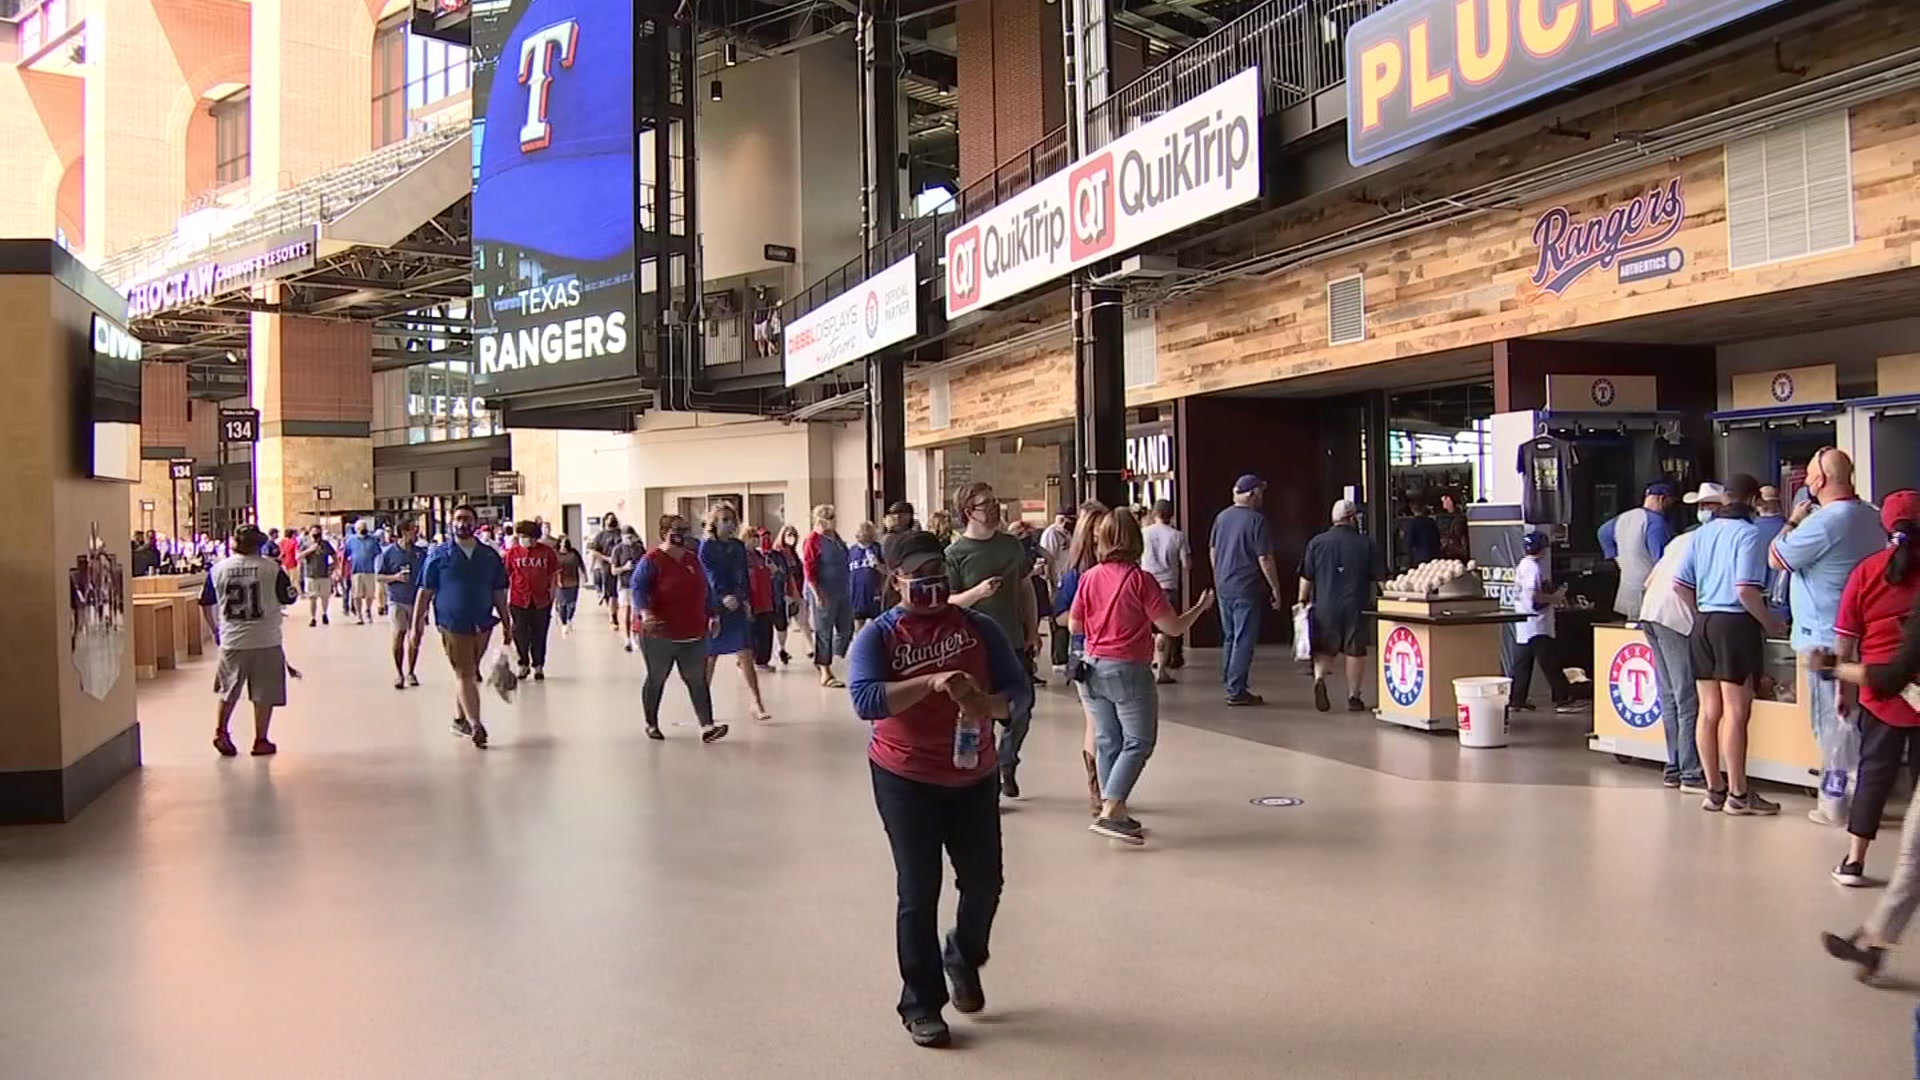 Texas Rangers will pack in the fans on Opening Day at Globe Life